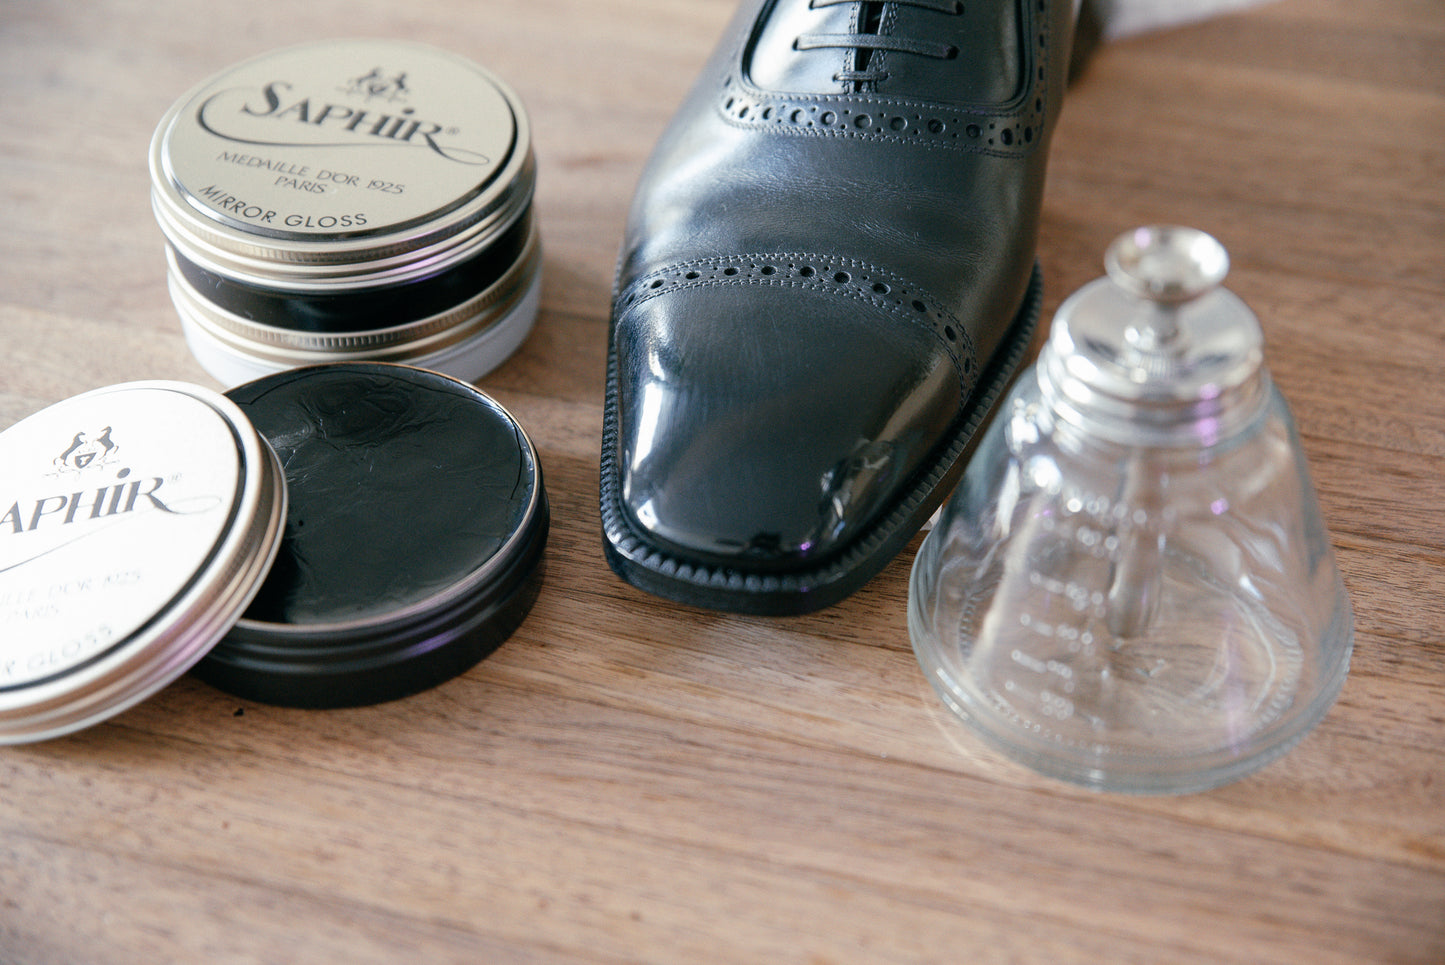 Brillaré mirror shine service photo - Black TOM FORD cap toe leather oxford shoes shown with Saphir Medaille d'or Mirror gloss wax polish and brillaré high shine water dispenser displayed